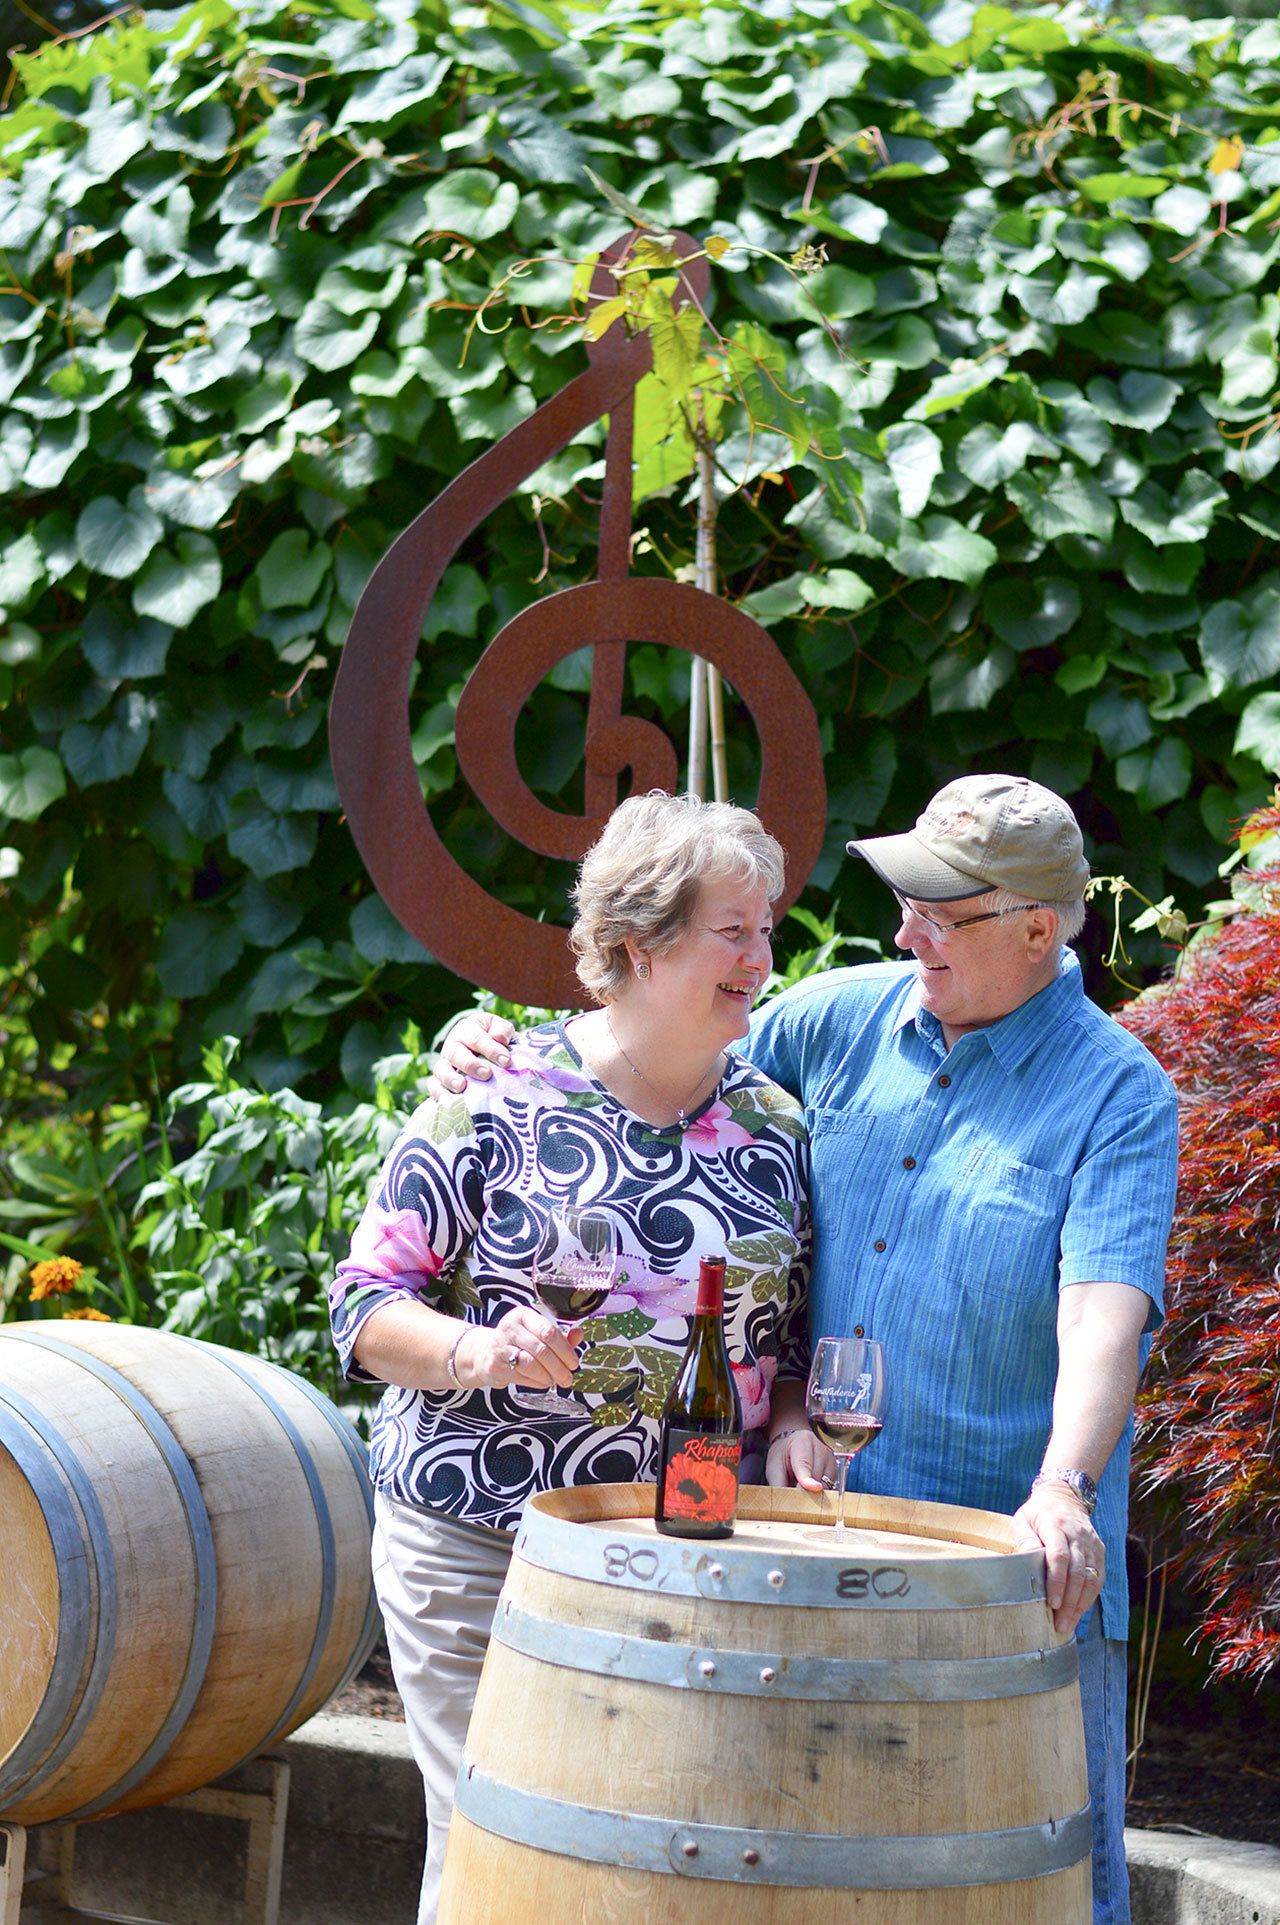 During tonight’s show, Camaraderie Cellars co-owners Don and Vicki Corson will serve a light picnic dinner and pour their wines. (Diane Urbani de la Paz)